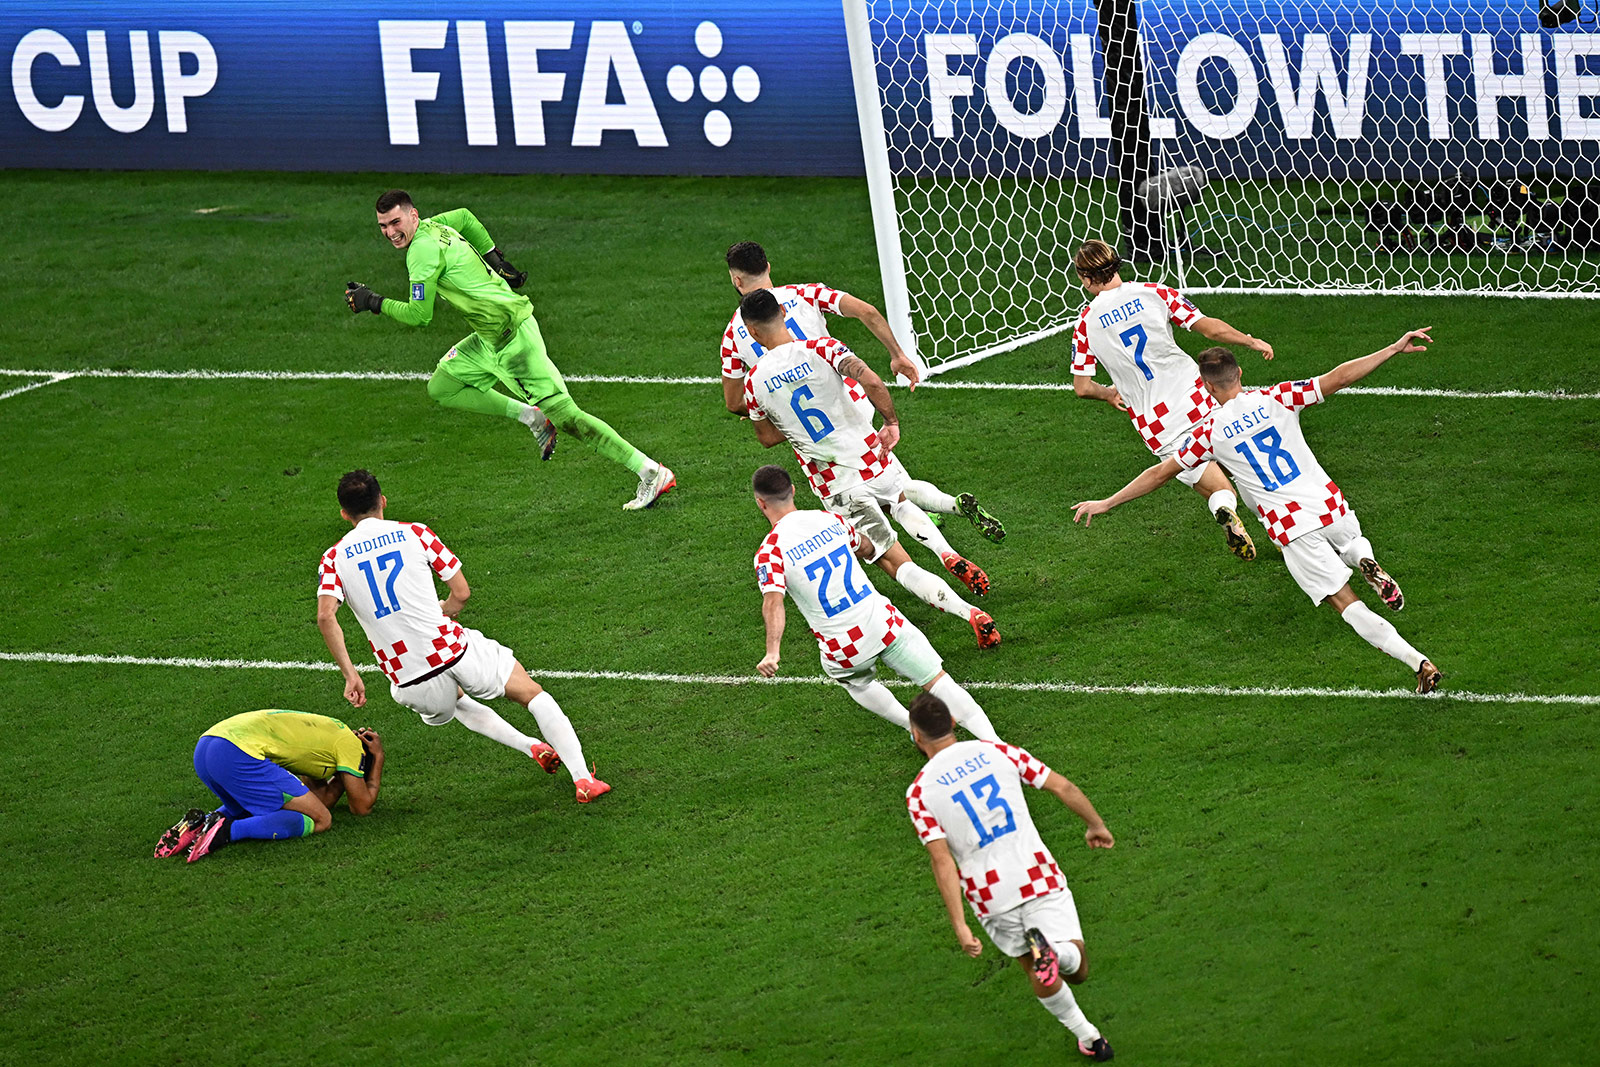 Croatia's players celebrate their win against Brazil on December 9.